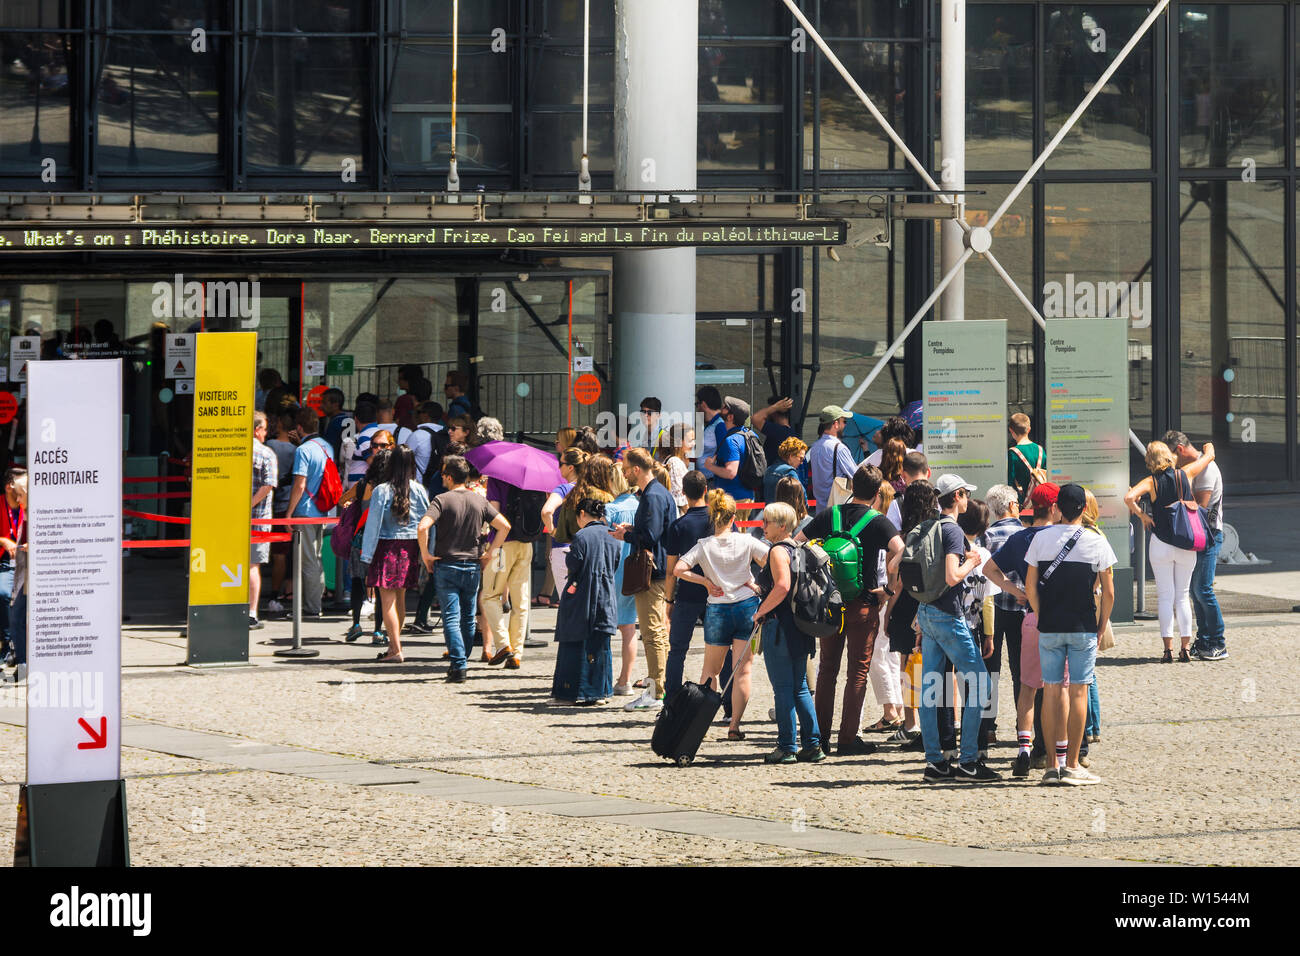 Tourists queuing for entry to the Centre Pompidou art gallery, Paris, France. Stock Photo